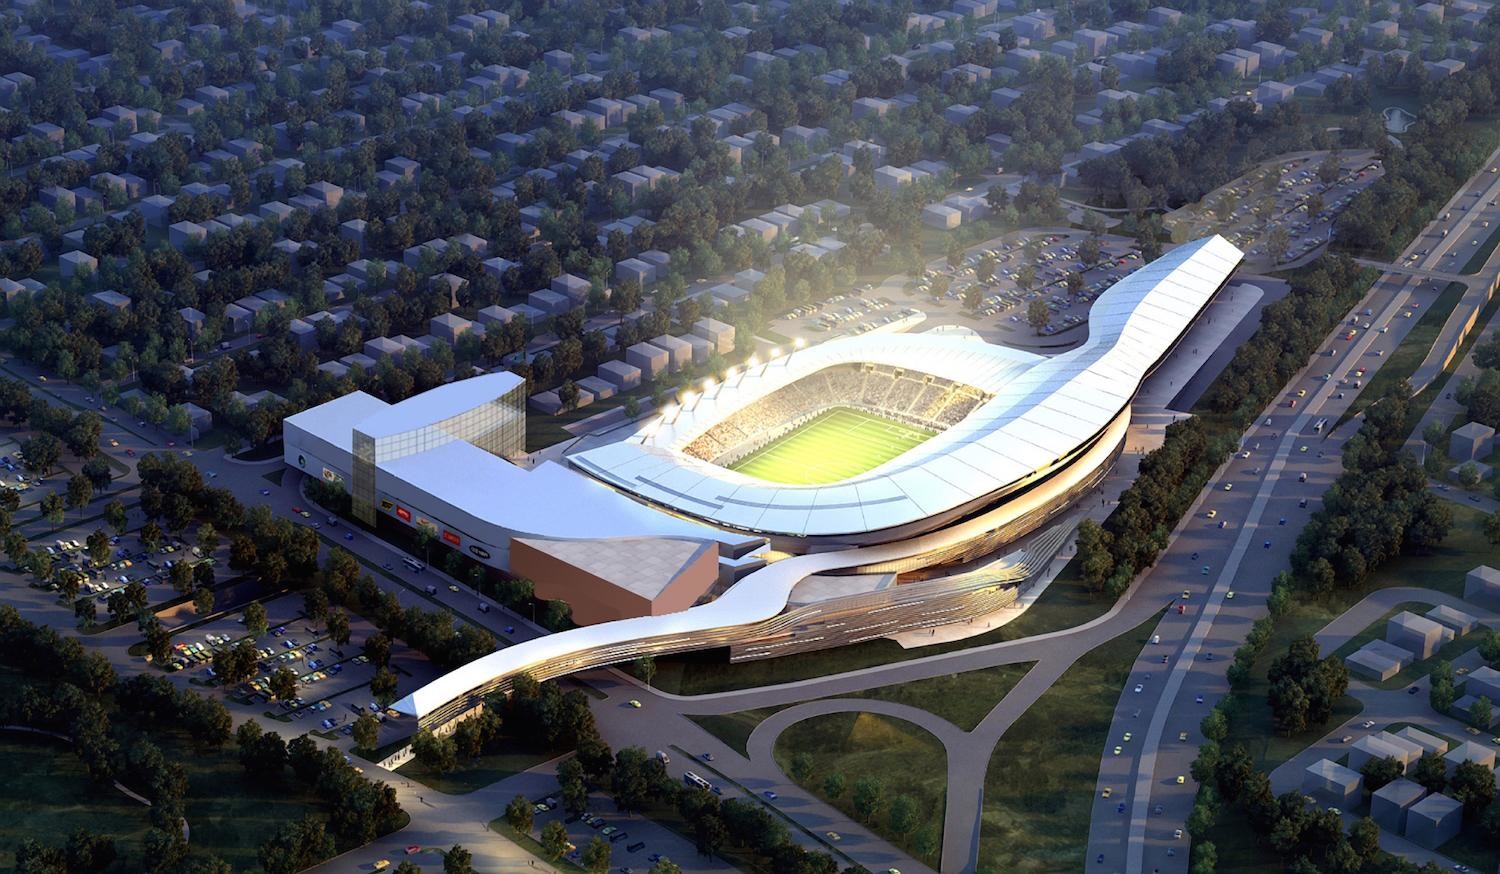 The proposed stadium complex that the New York Cosmos wish to build would boast a 25,000-seat arena with restaurant and retail space, as well as a 175-room hotel.